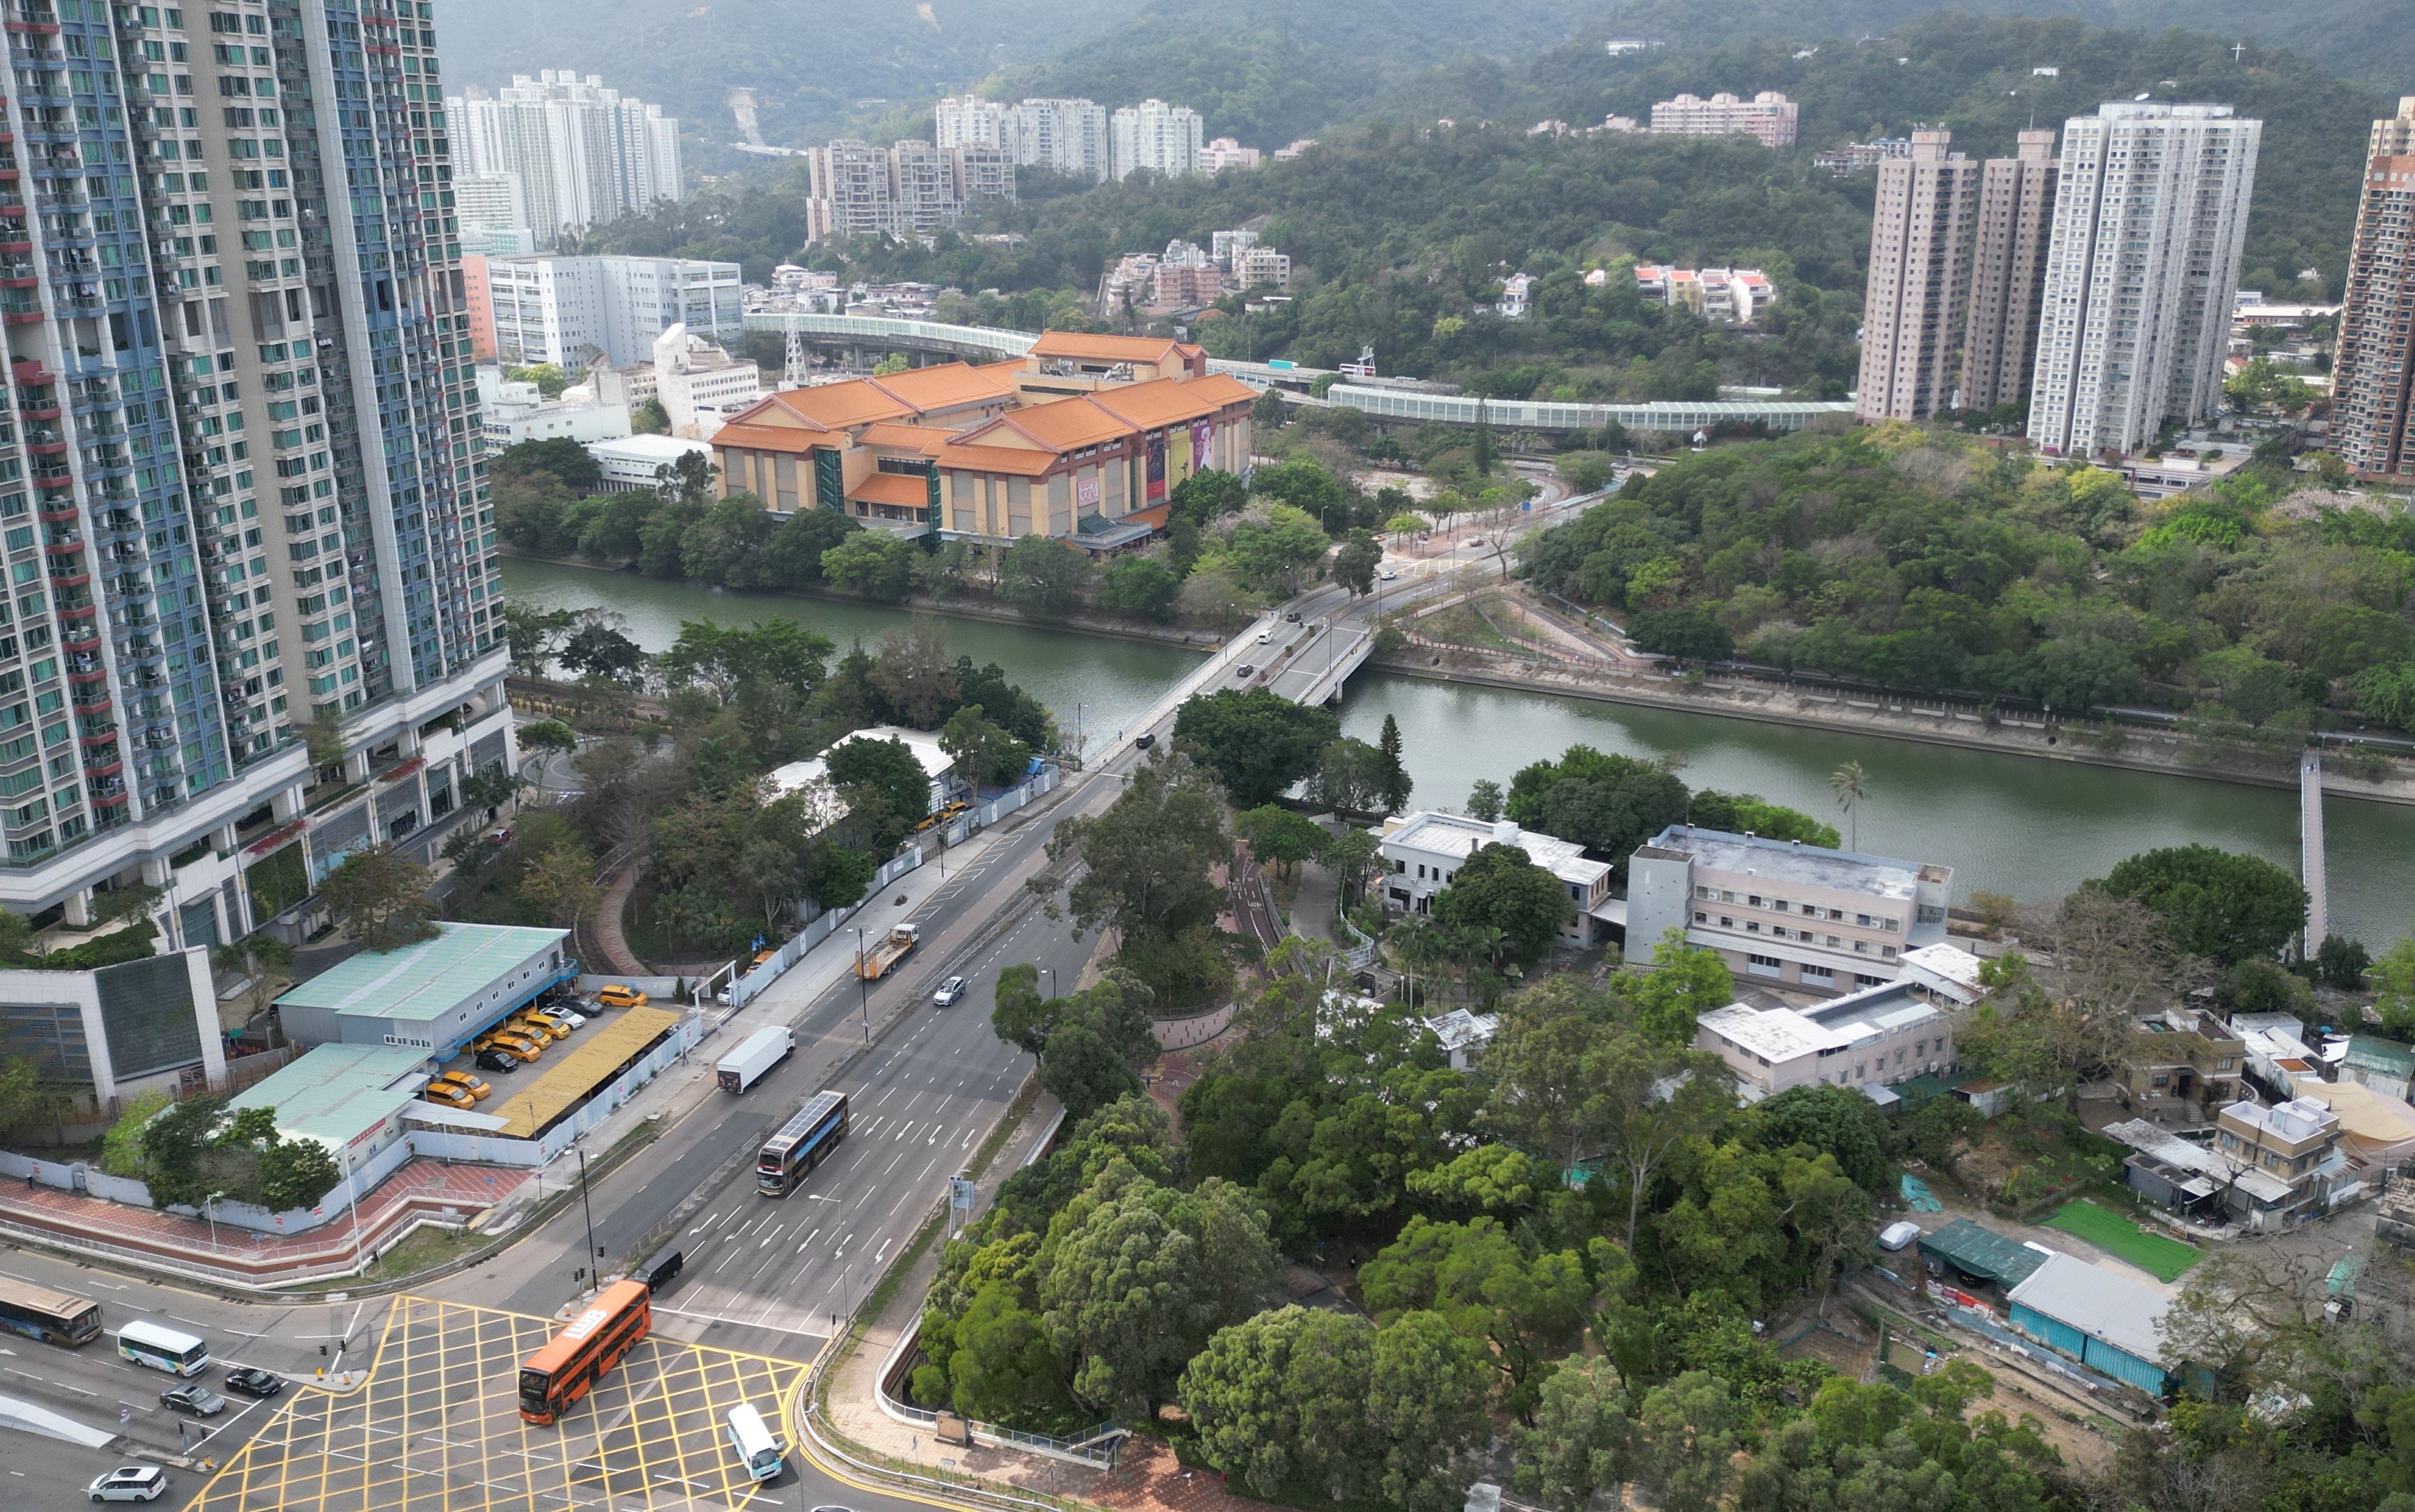 The new road will directly connect Sha Tin (pictured) with Ma On Shan, Tsuen Wan and Kowloon East. Photo: Martin Chan